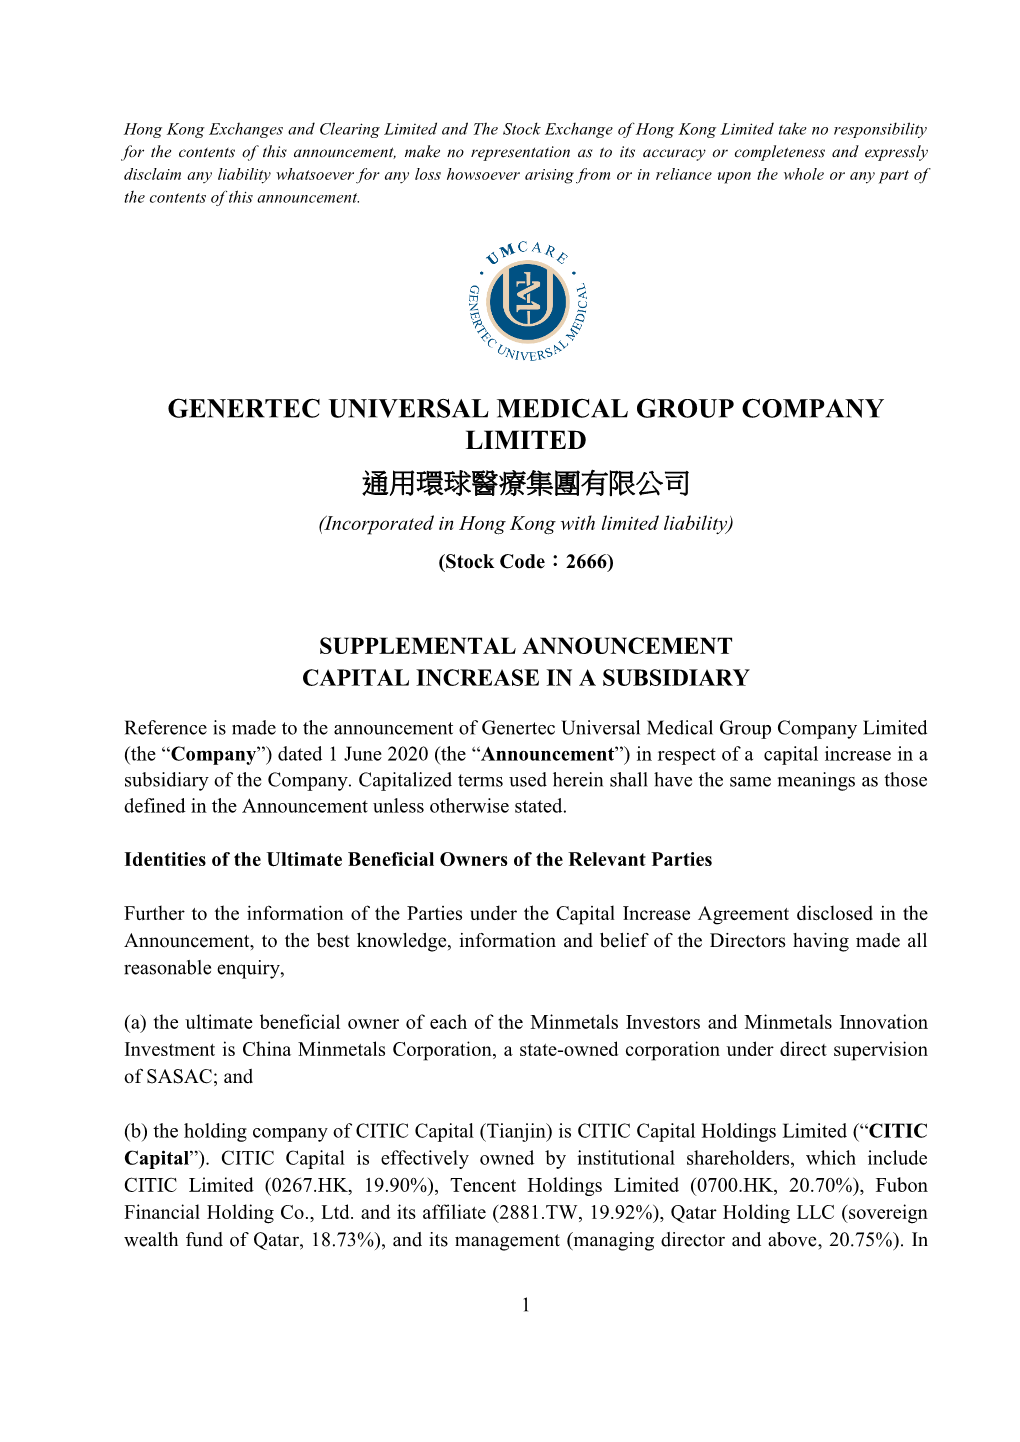 GENERTEC UNIVERSAL MEDICAL GROUP COMPANY LIMITED 通用環球醫療集團有限公司 (Incorporated in Hong Kong with Limited Liability) (Stock Code：2666)